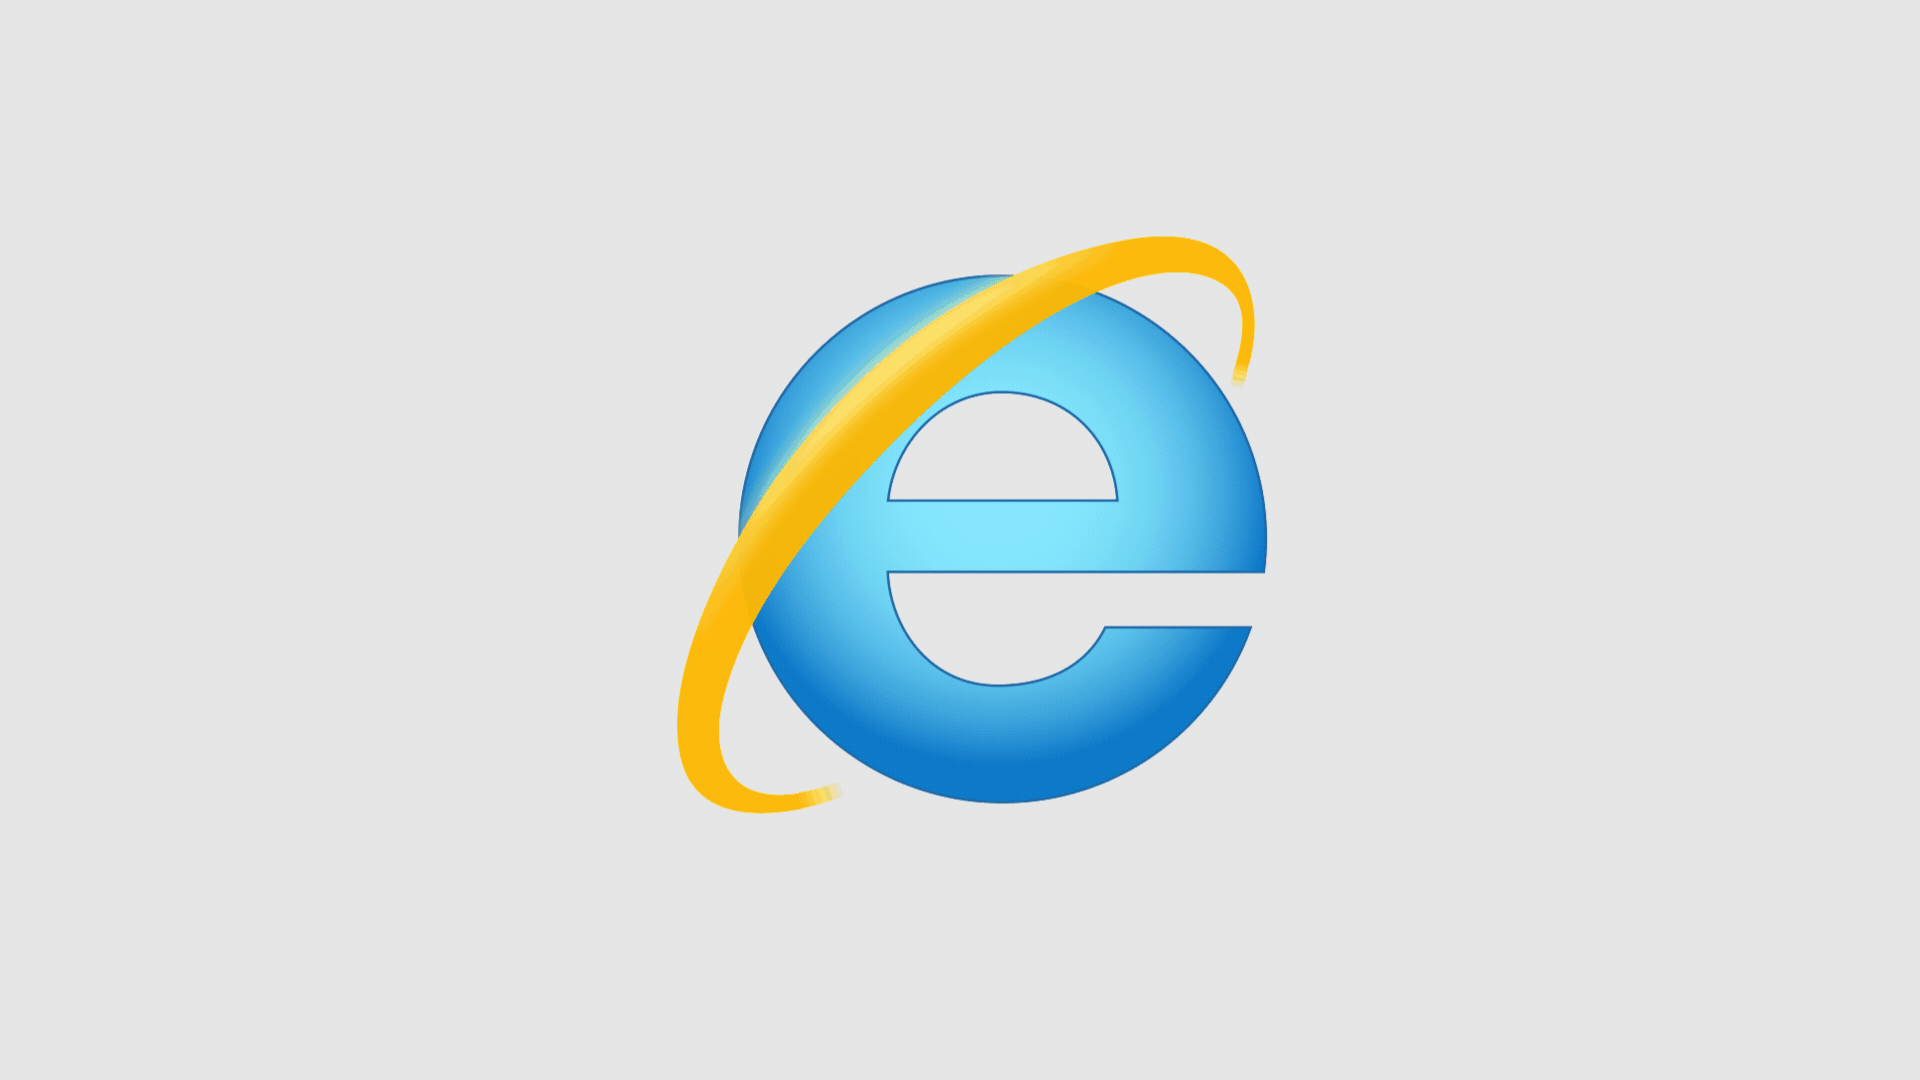 Internet Explorer dies today, but its spirit lives on in Microsoft Edge